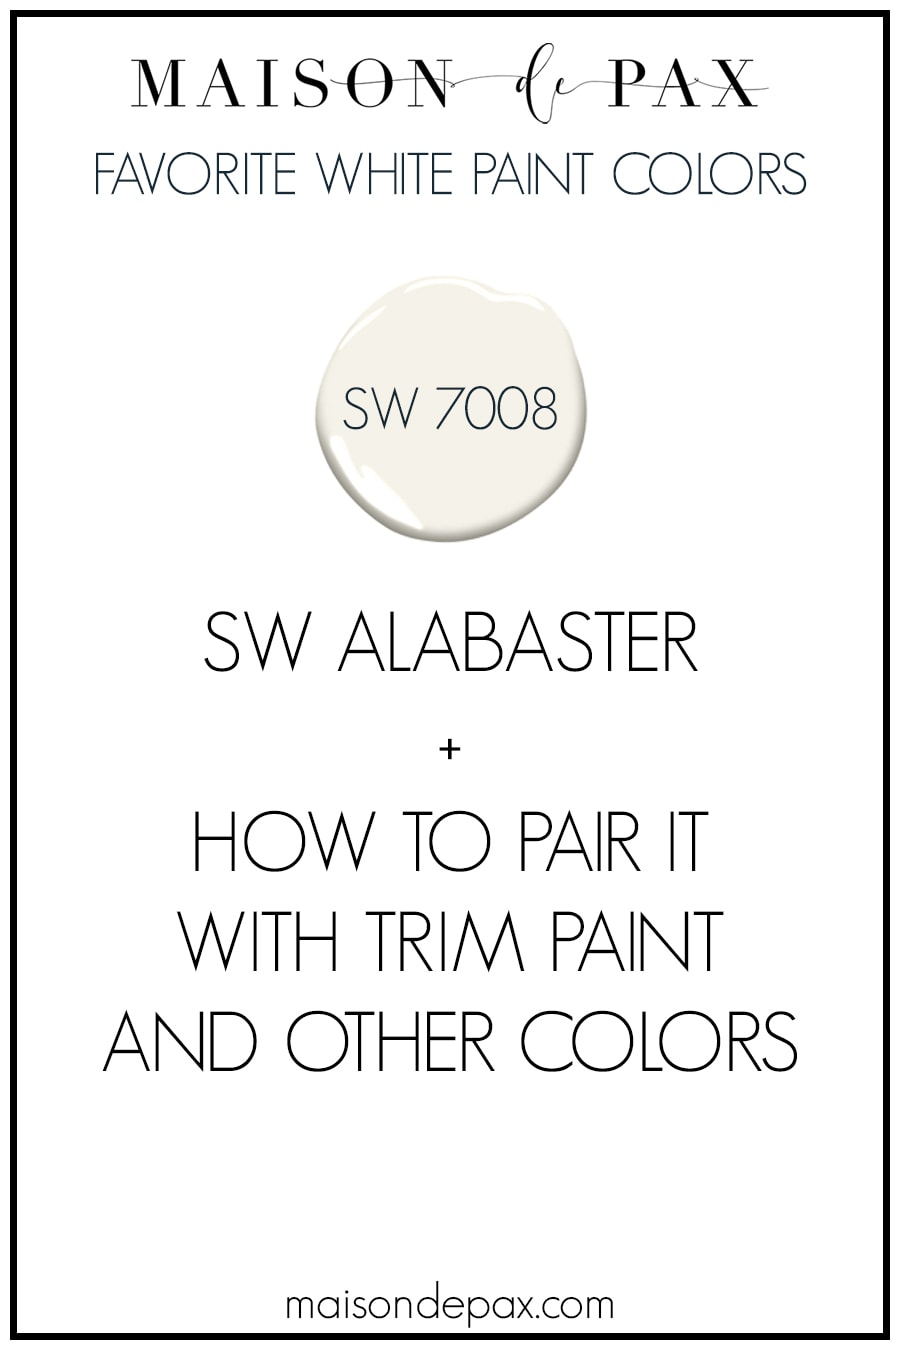 What trim colors go with Alabaster walls